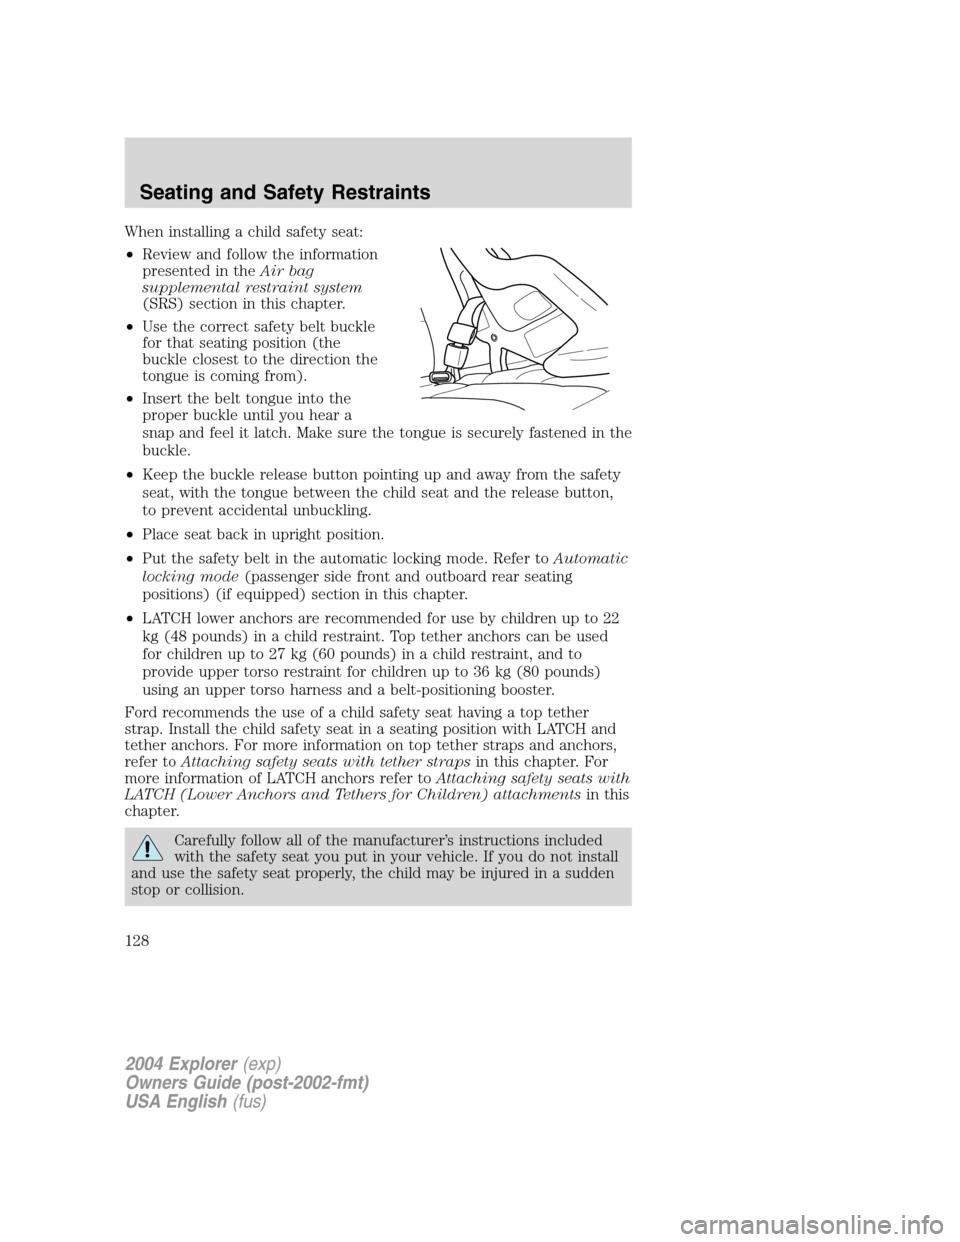 FORD EXPLORER 2004 3.G Owners Manual When installing a child safety seat:
•Review and follow the information
presented in theAir bag
supplemental restraint system
(SRS) section in this chapter.
•Use the correct safety belt buckle
for